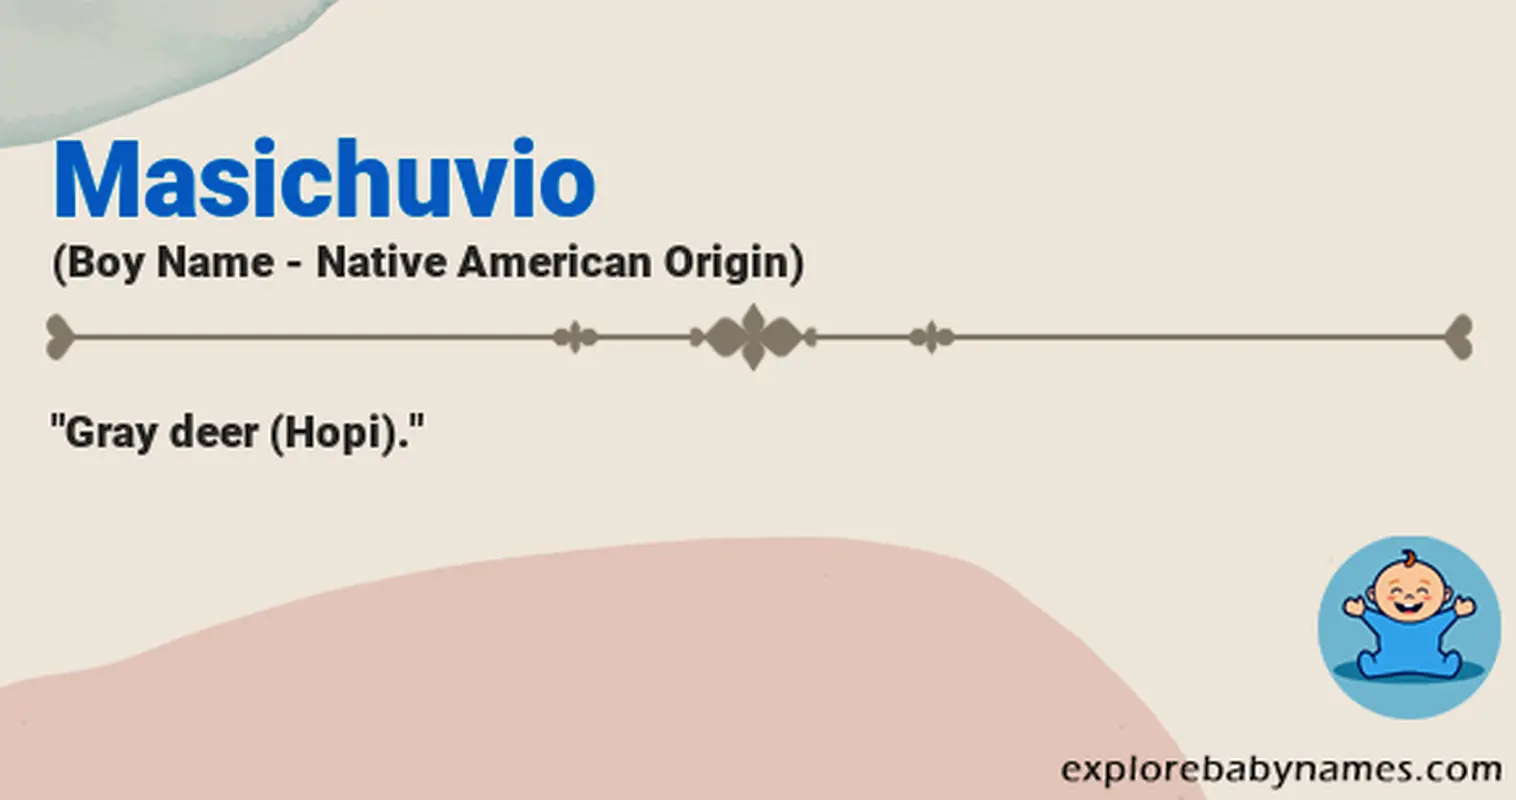 Meaning of Masichuvio